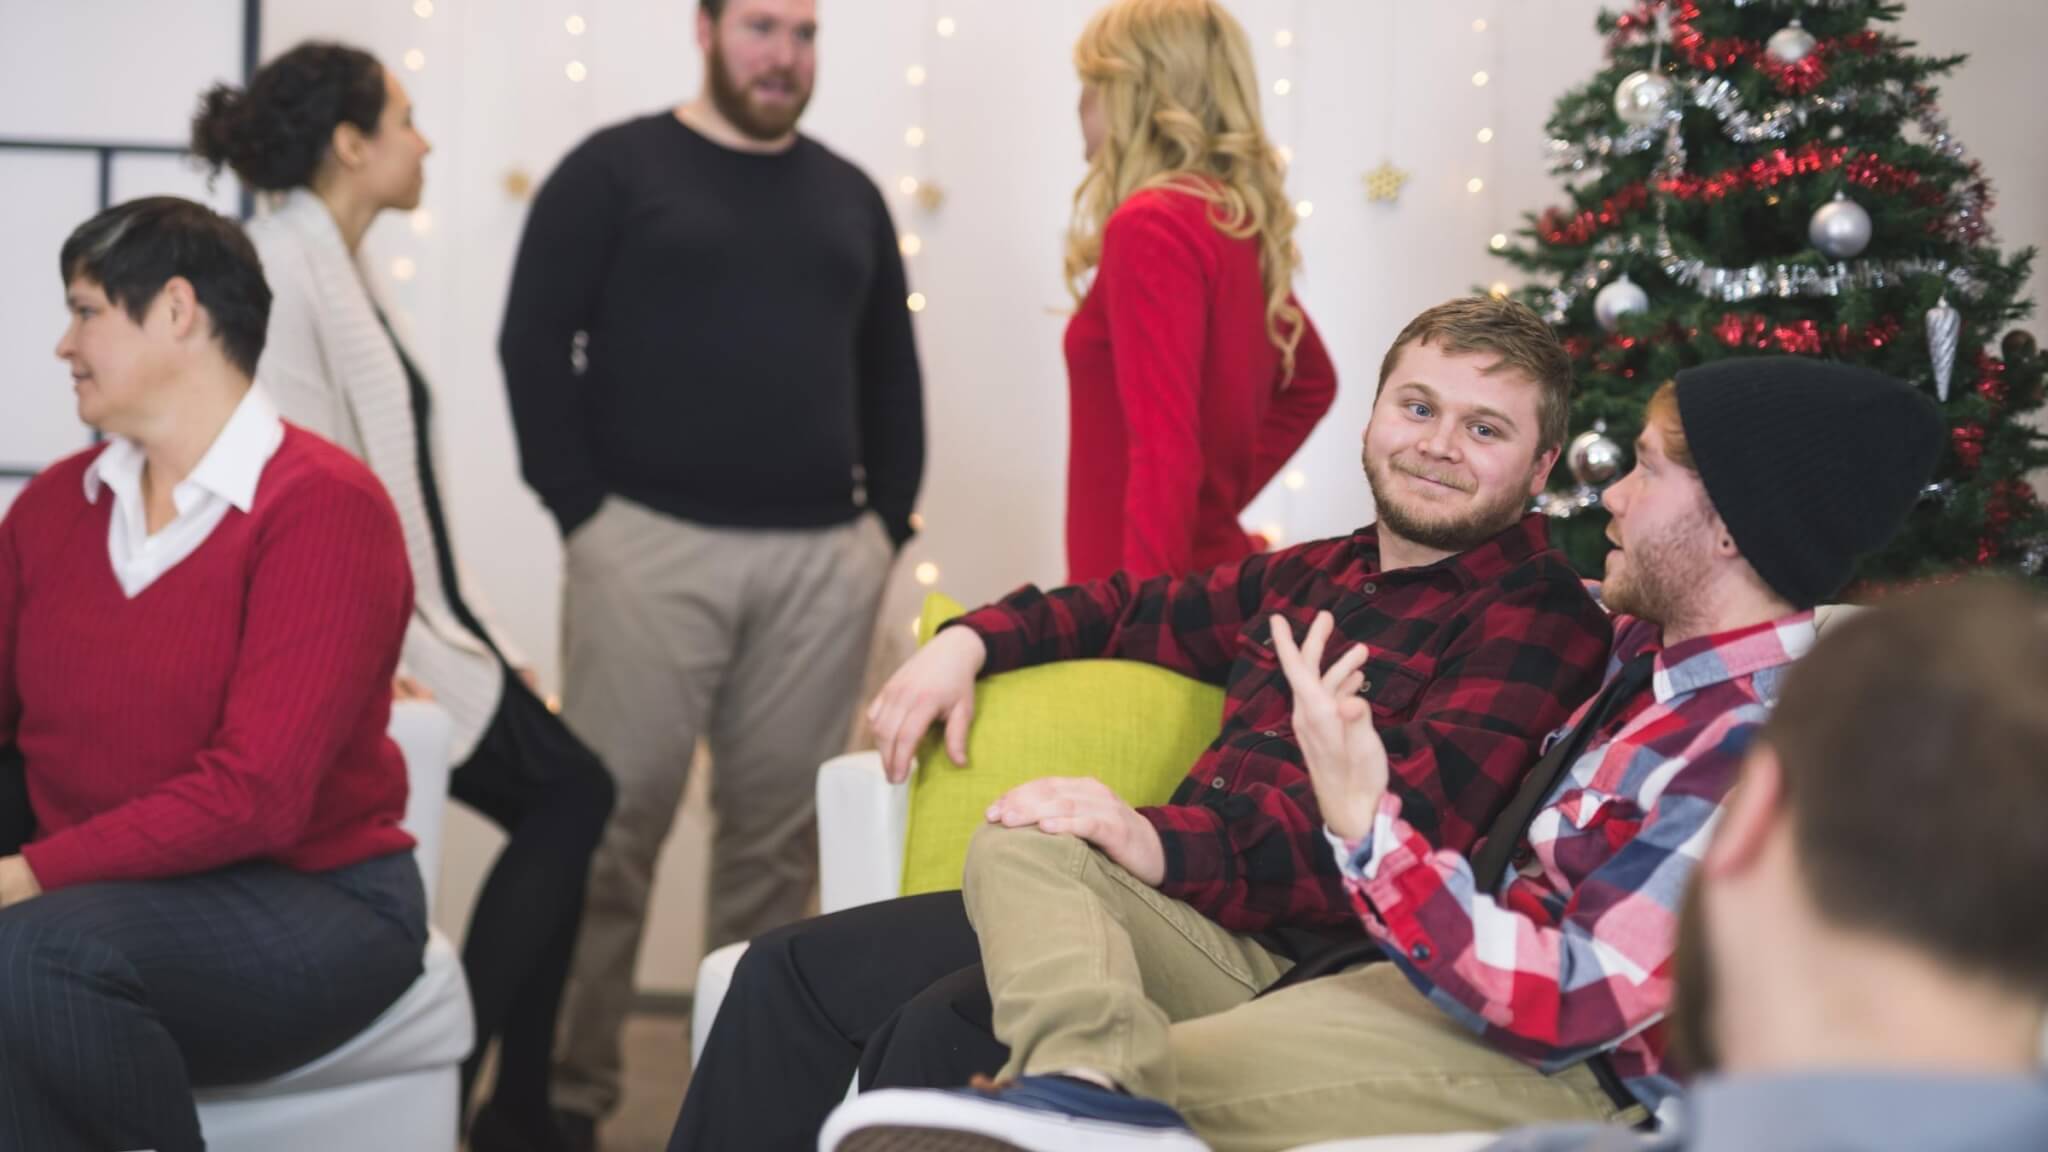 How to Celebrate Holidays Inclusively at Work